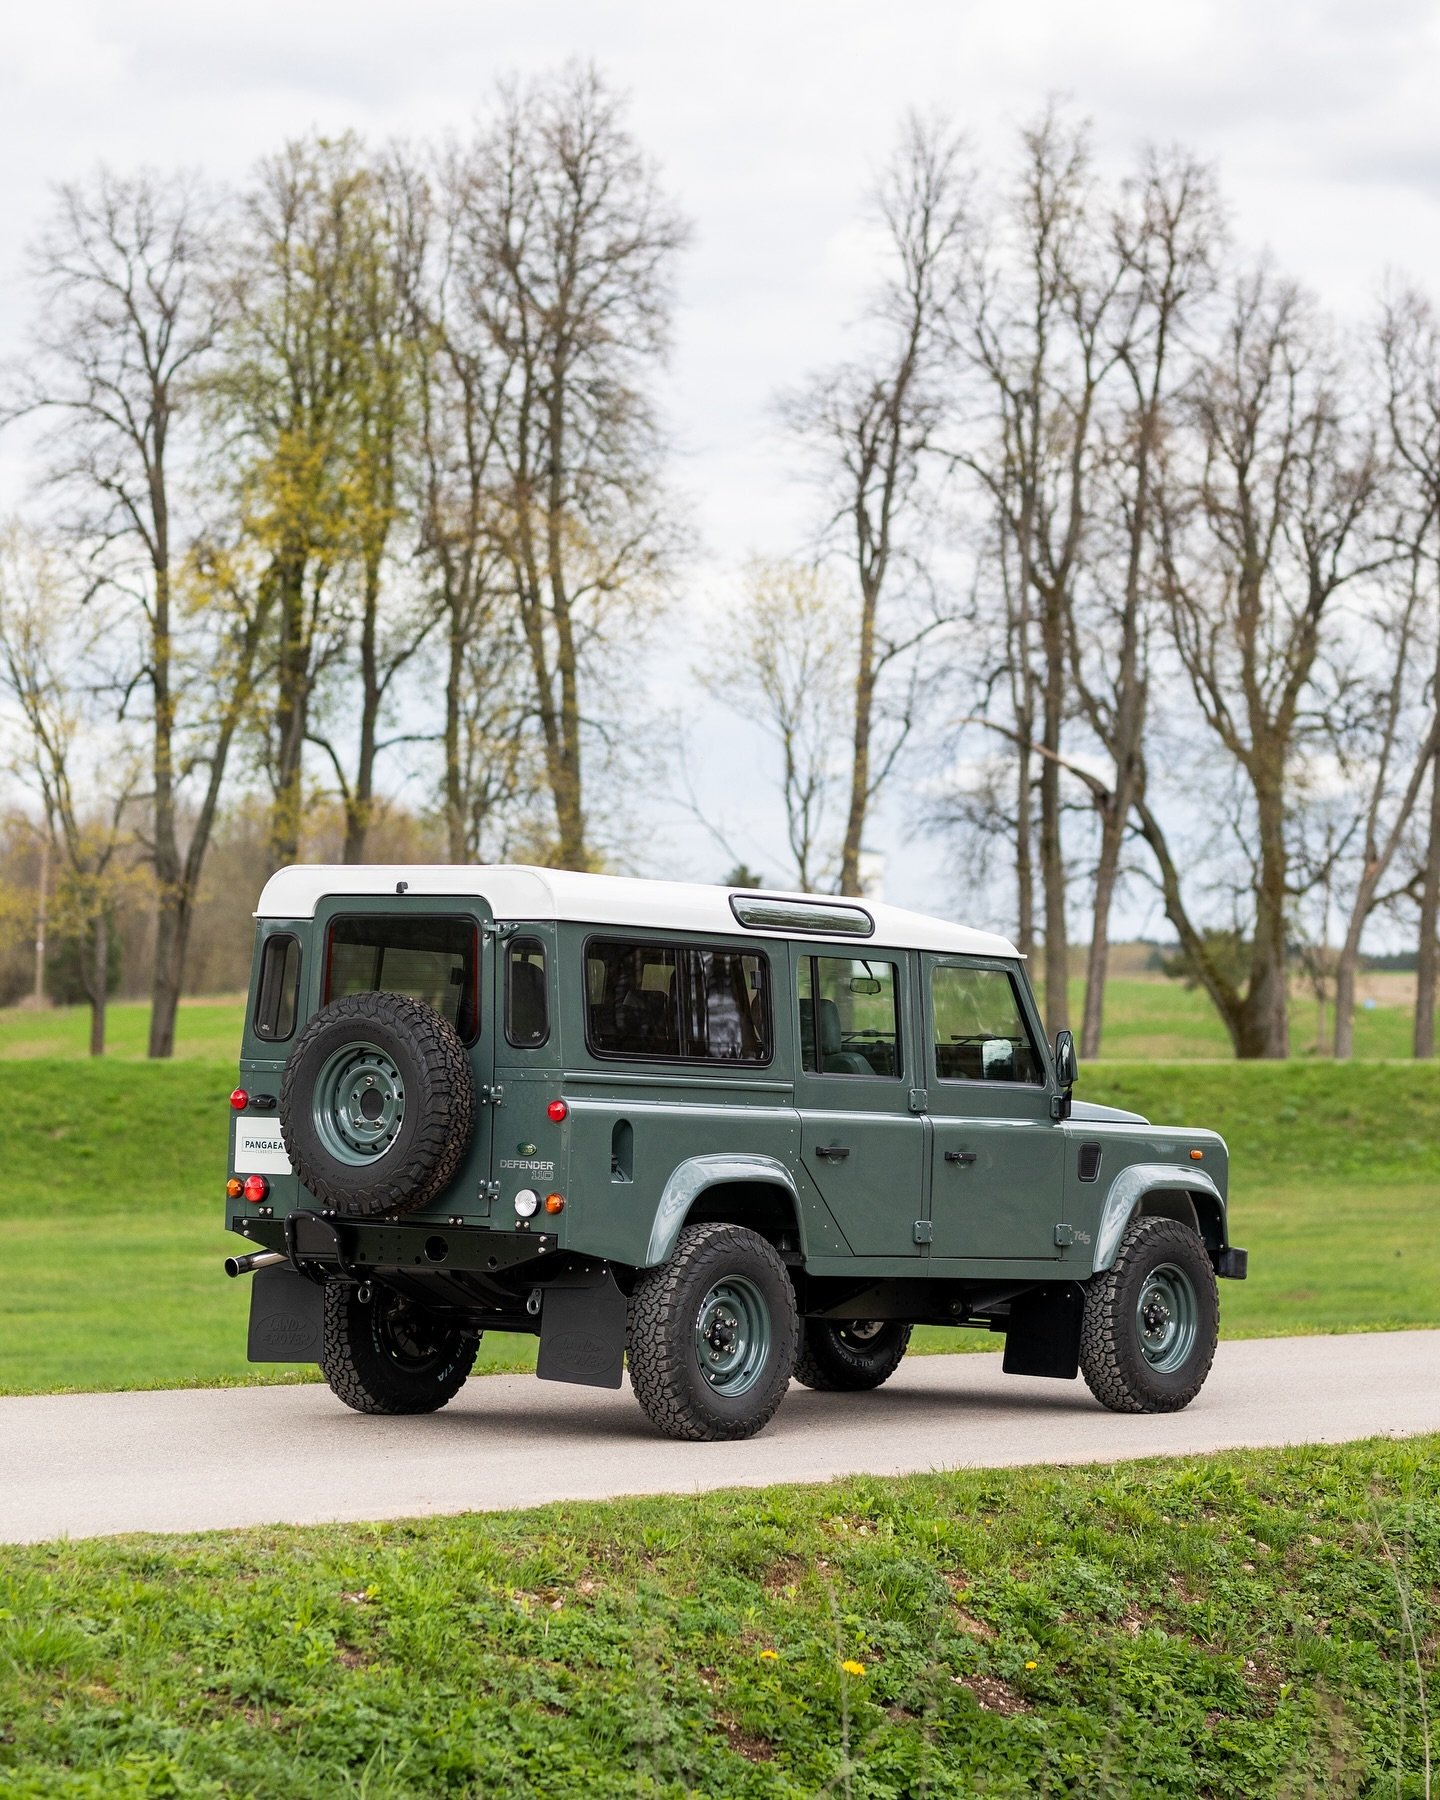 1998 Land Rover Defender 110 - Td5 (Gentleman&rsquo;s Spec.)

Keswick Green (LRC799) has become one of the most popular Defender colour&rsquo;s in recent years, and for a good reason!

#landroverdefender #defender #landroverdefender90 #landroverdefen